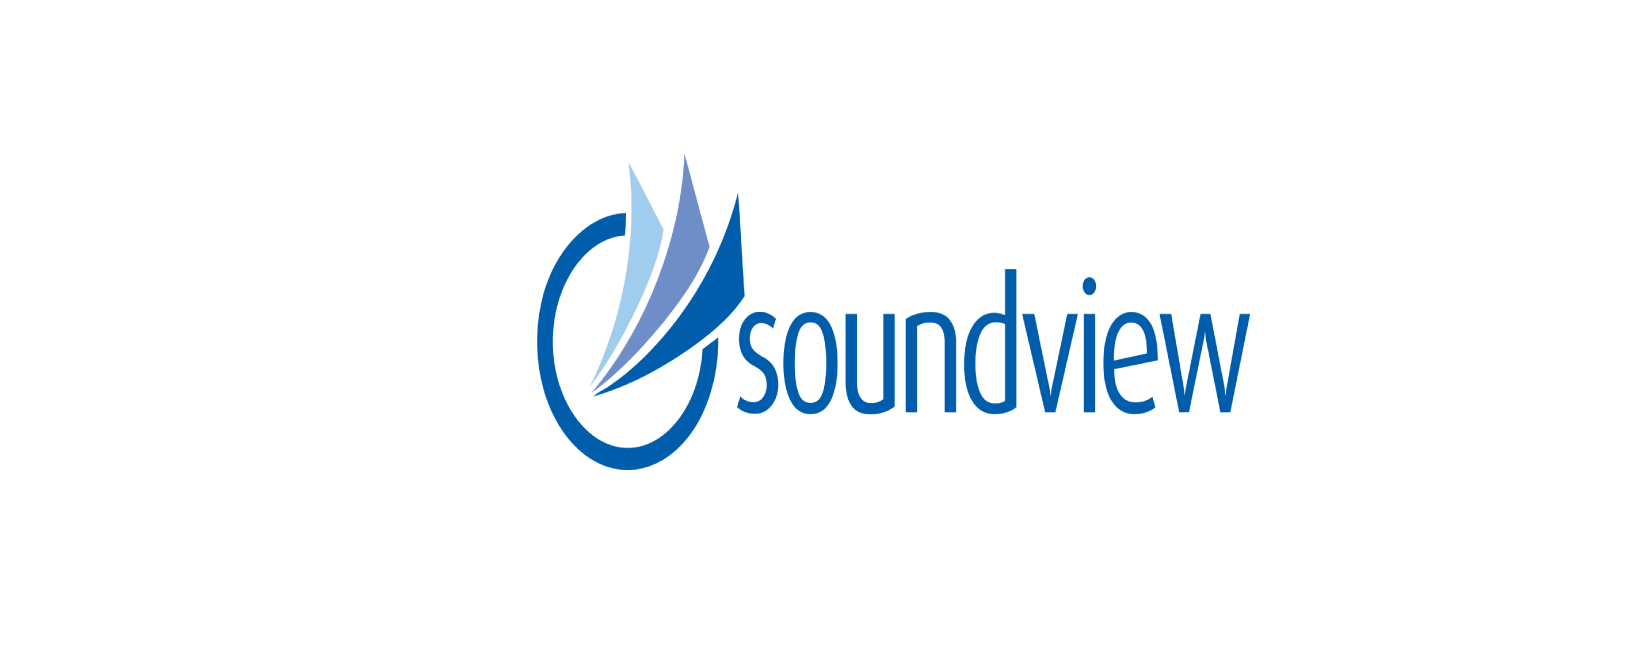 Soundview Discount Code 2023